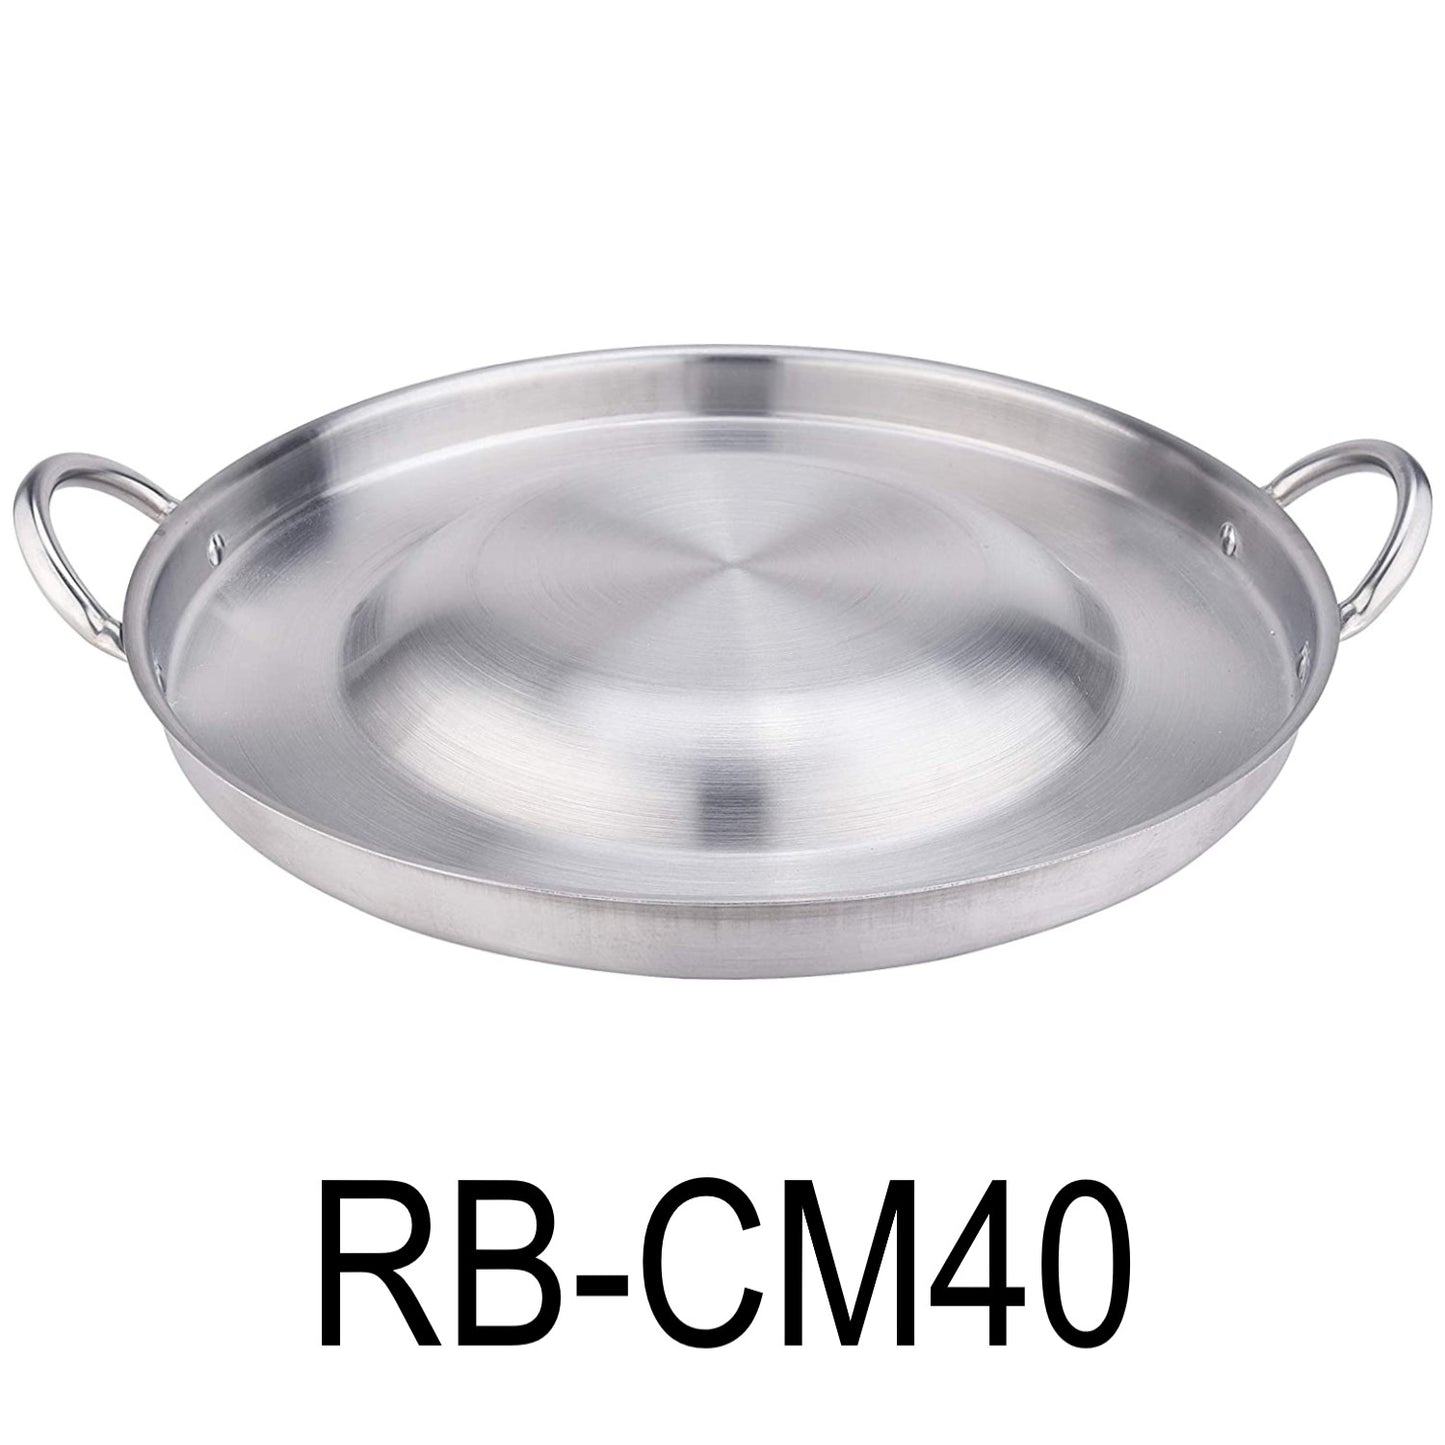 40cm Heavy Duty Stainless Steel Convex Comal